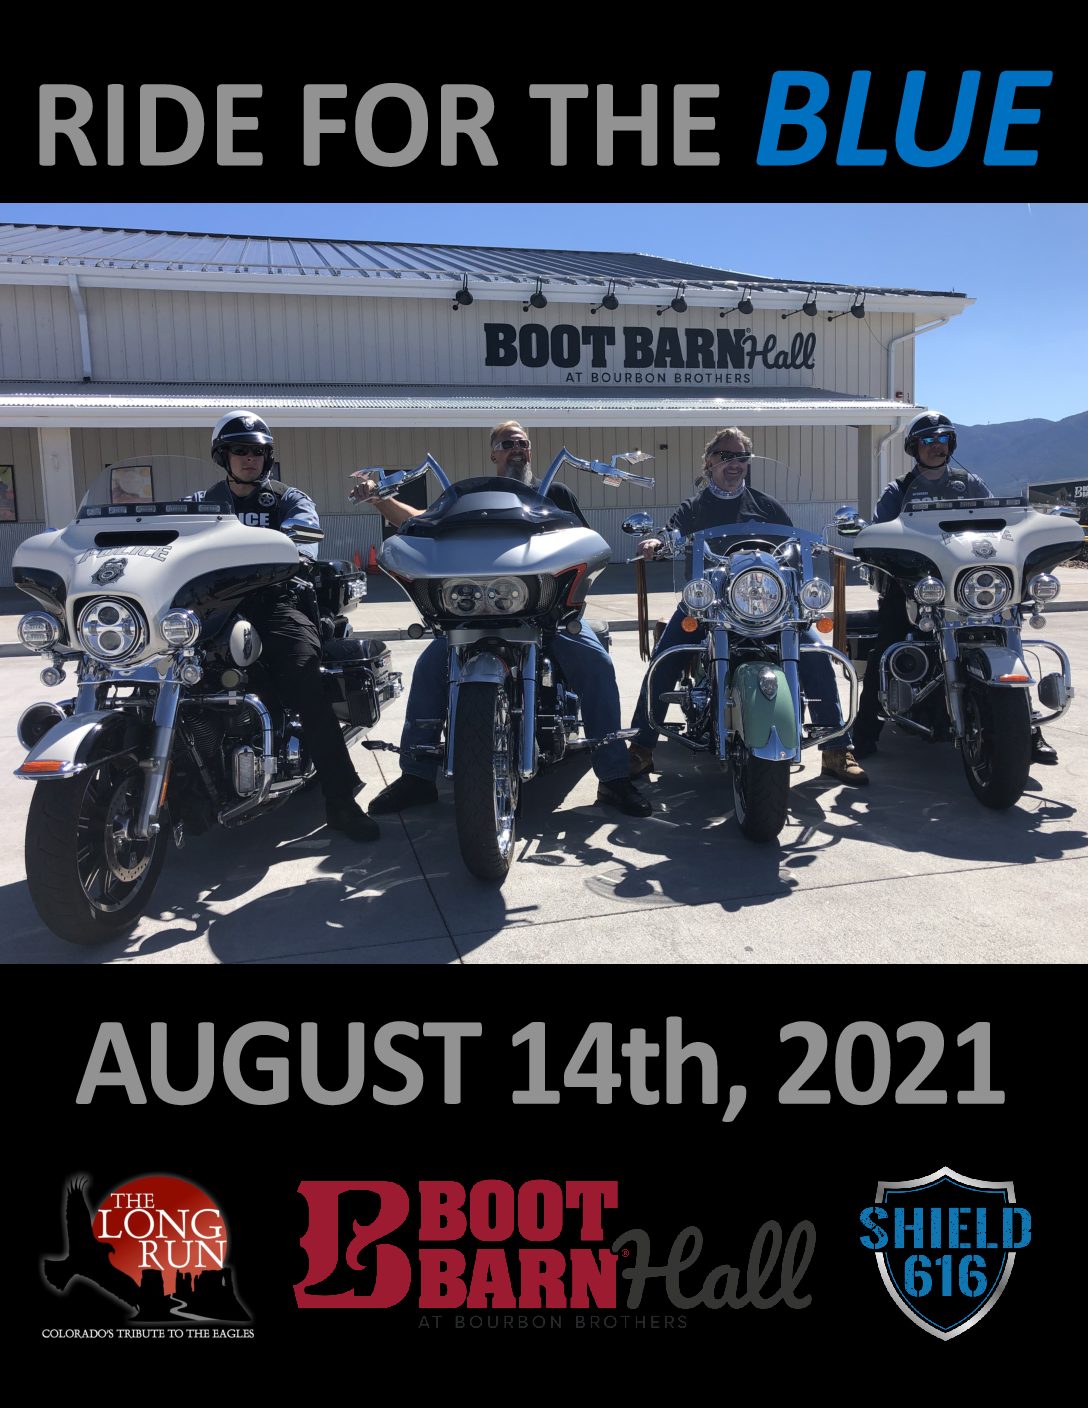 SHIELD 616 Ride for the BLUE Pikes Peak HOG